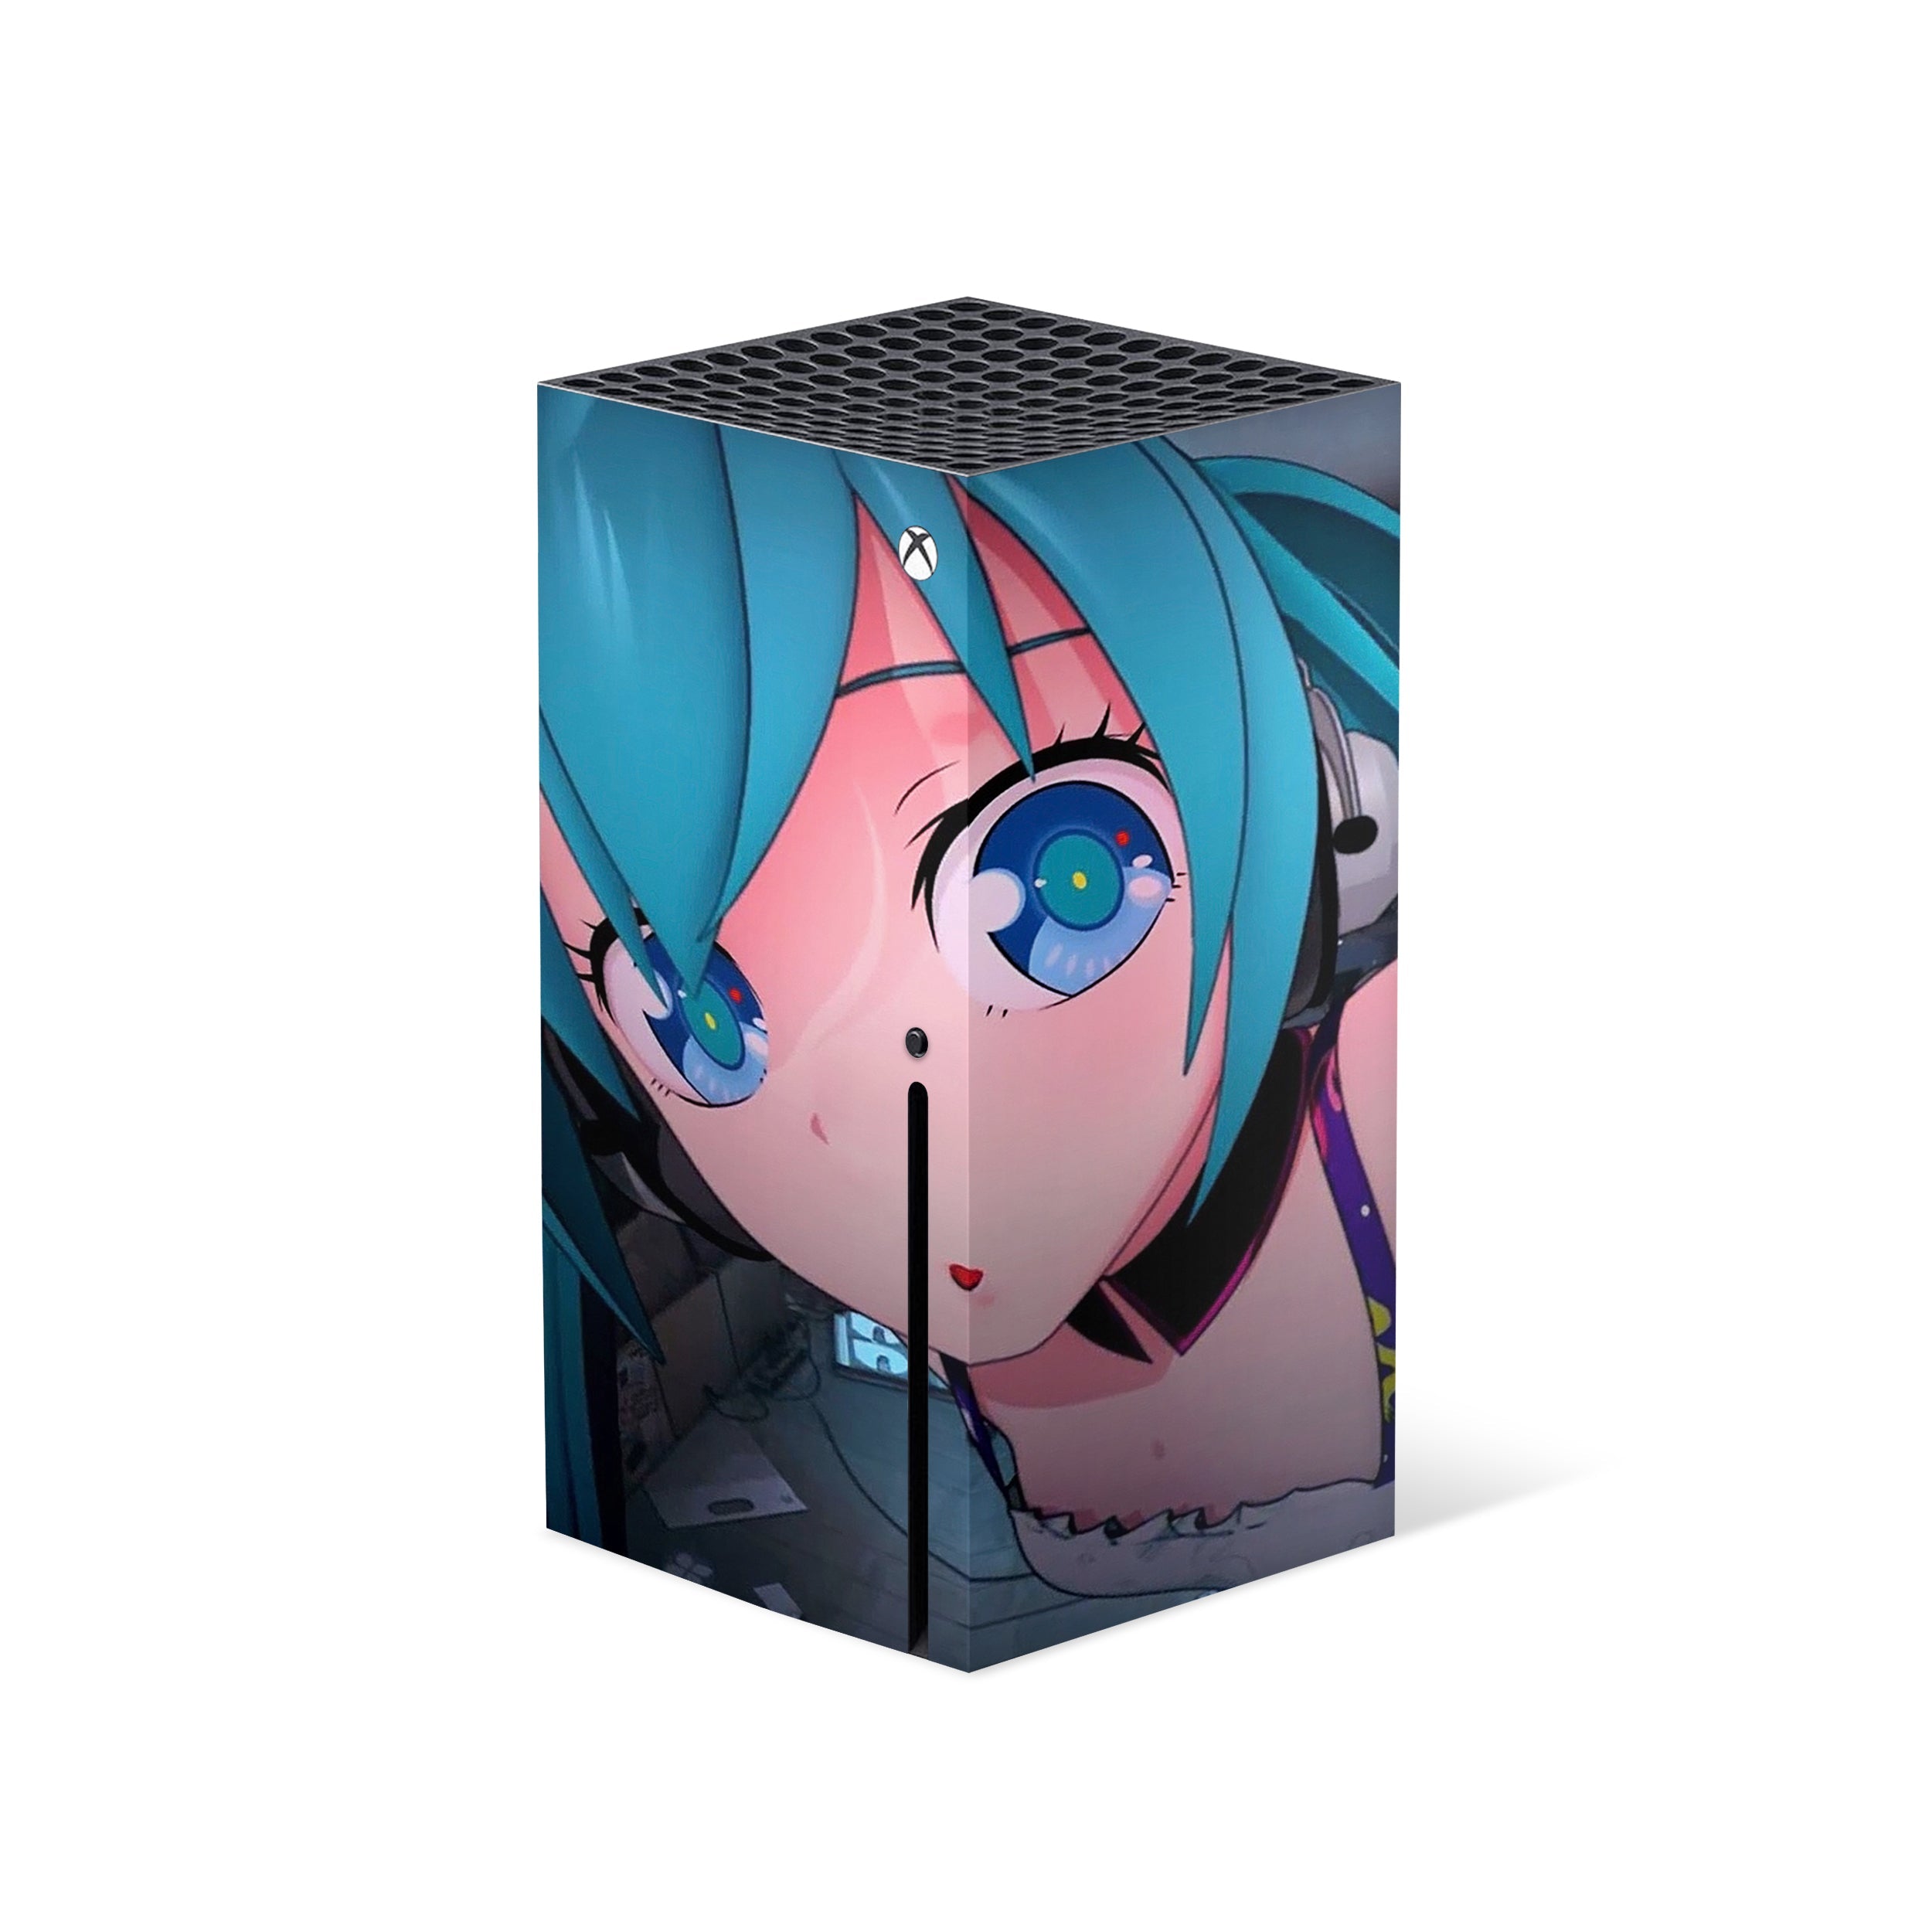 A video game skin featuring a Anime Blue Haired Girl design for the Xbox Series X.